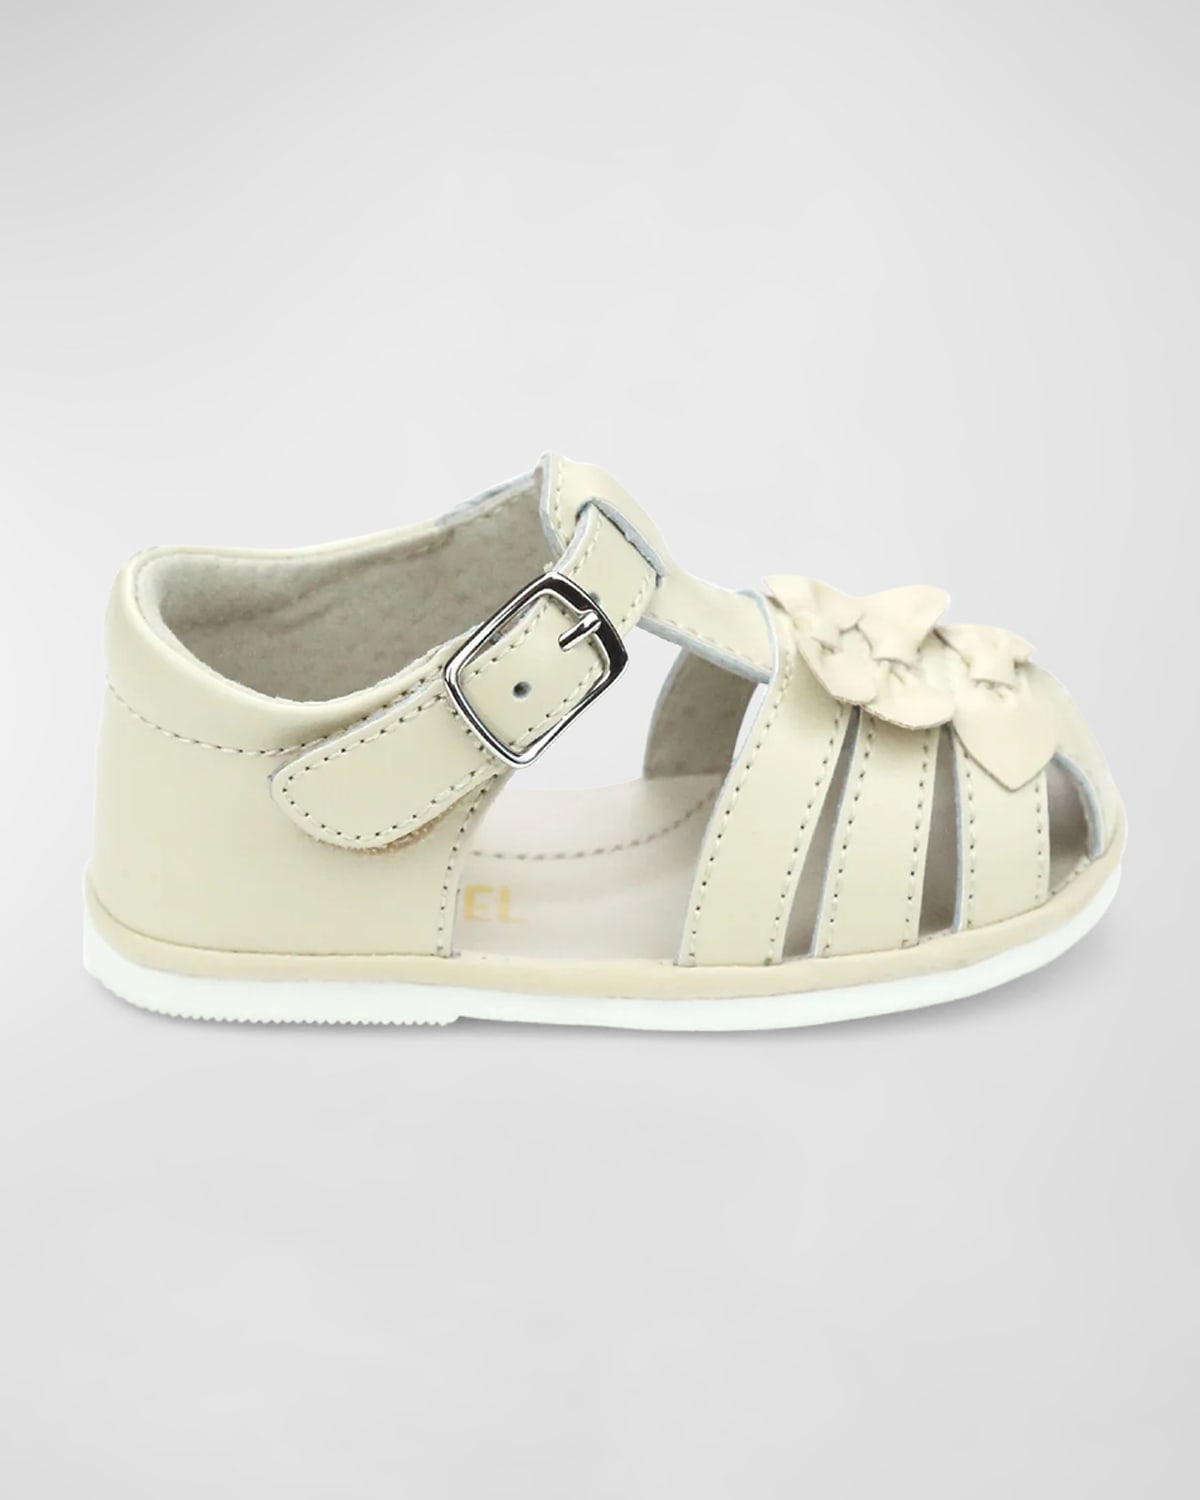 L'amour Shoes Kids' Girl's Everly Baby Bow Sandals, Baby In Oatmeal